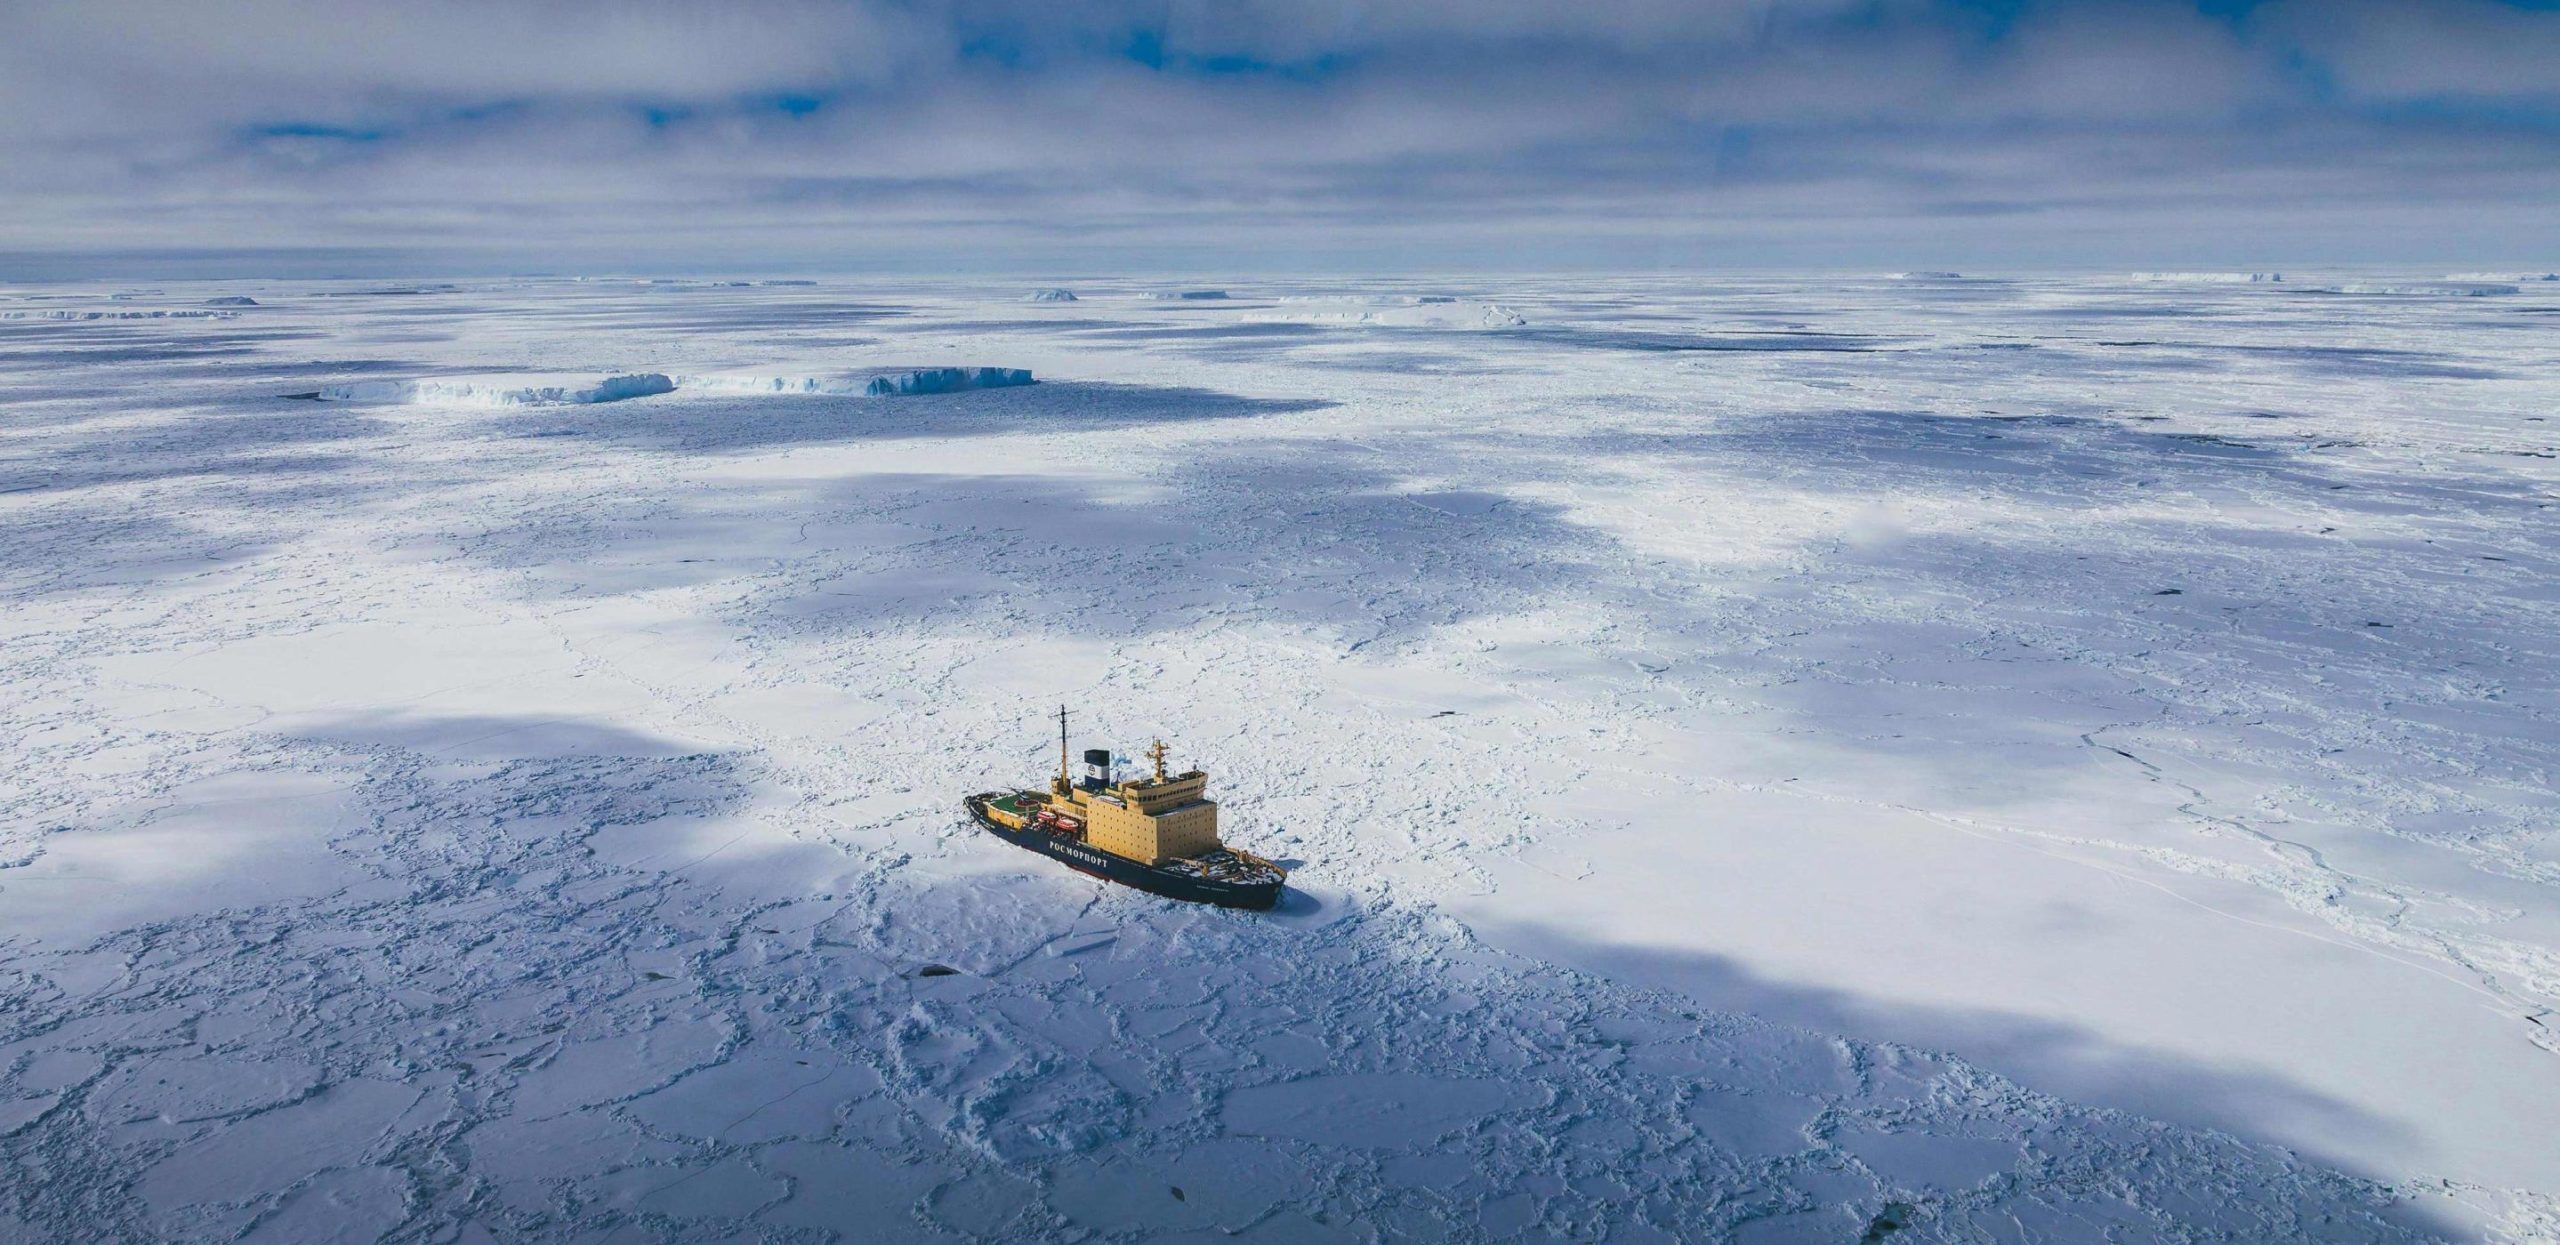 mighty Kapitan Khlebnikov cut through the icy waters heading to Snow Hill Island in Antarctica